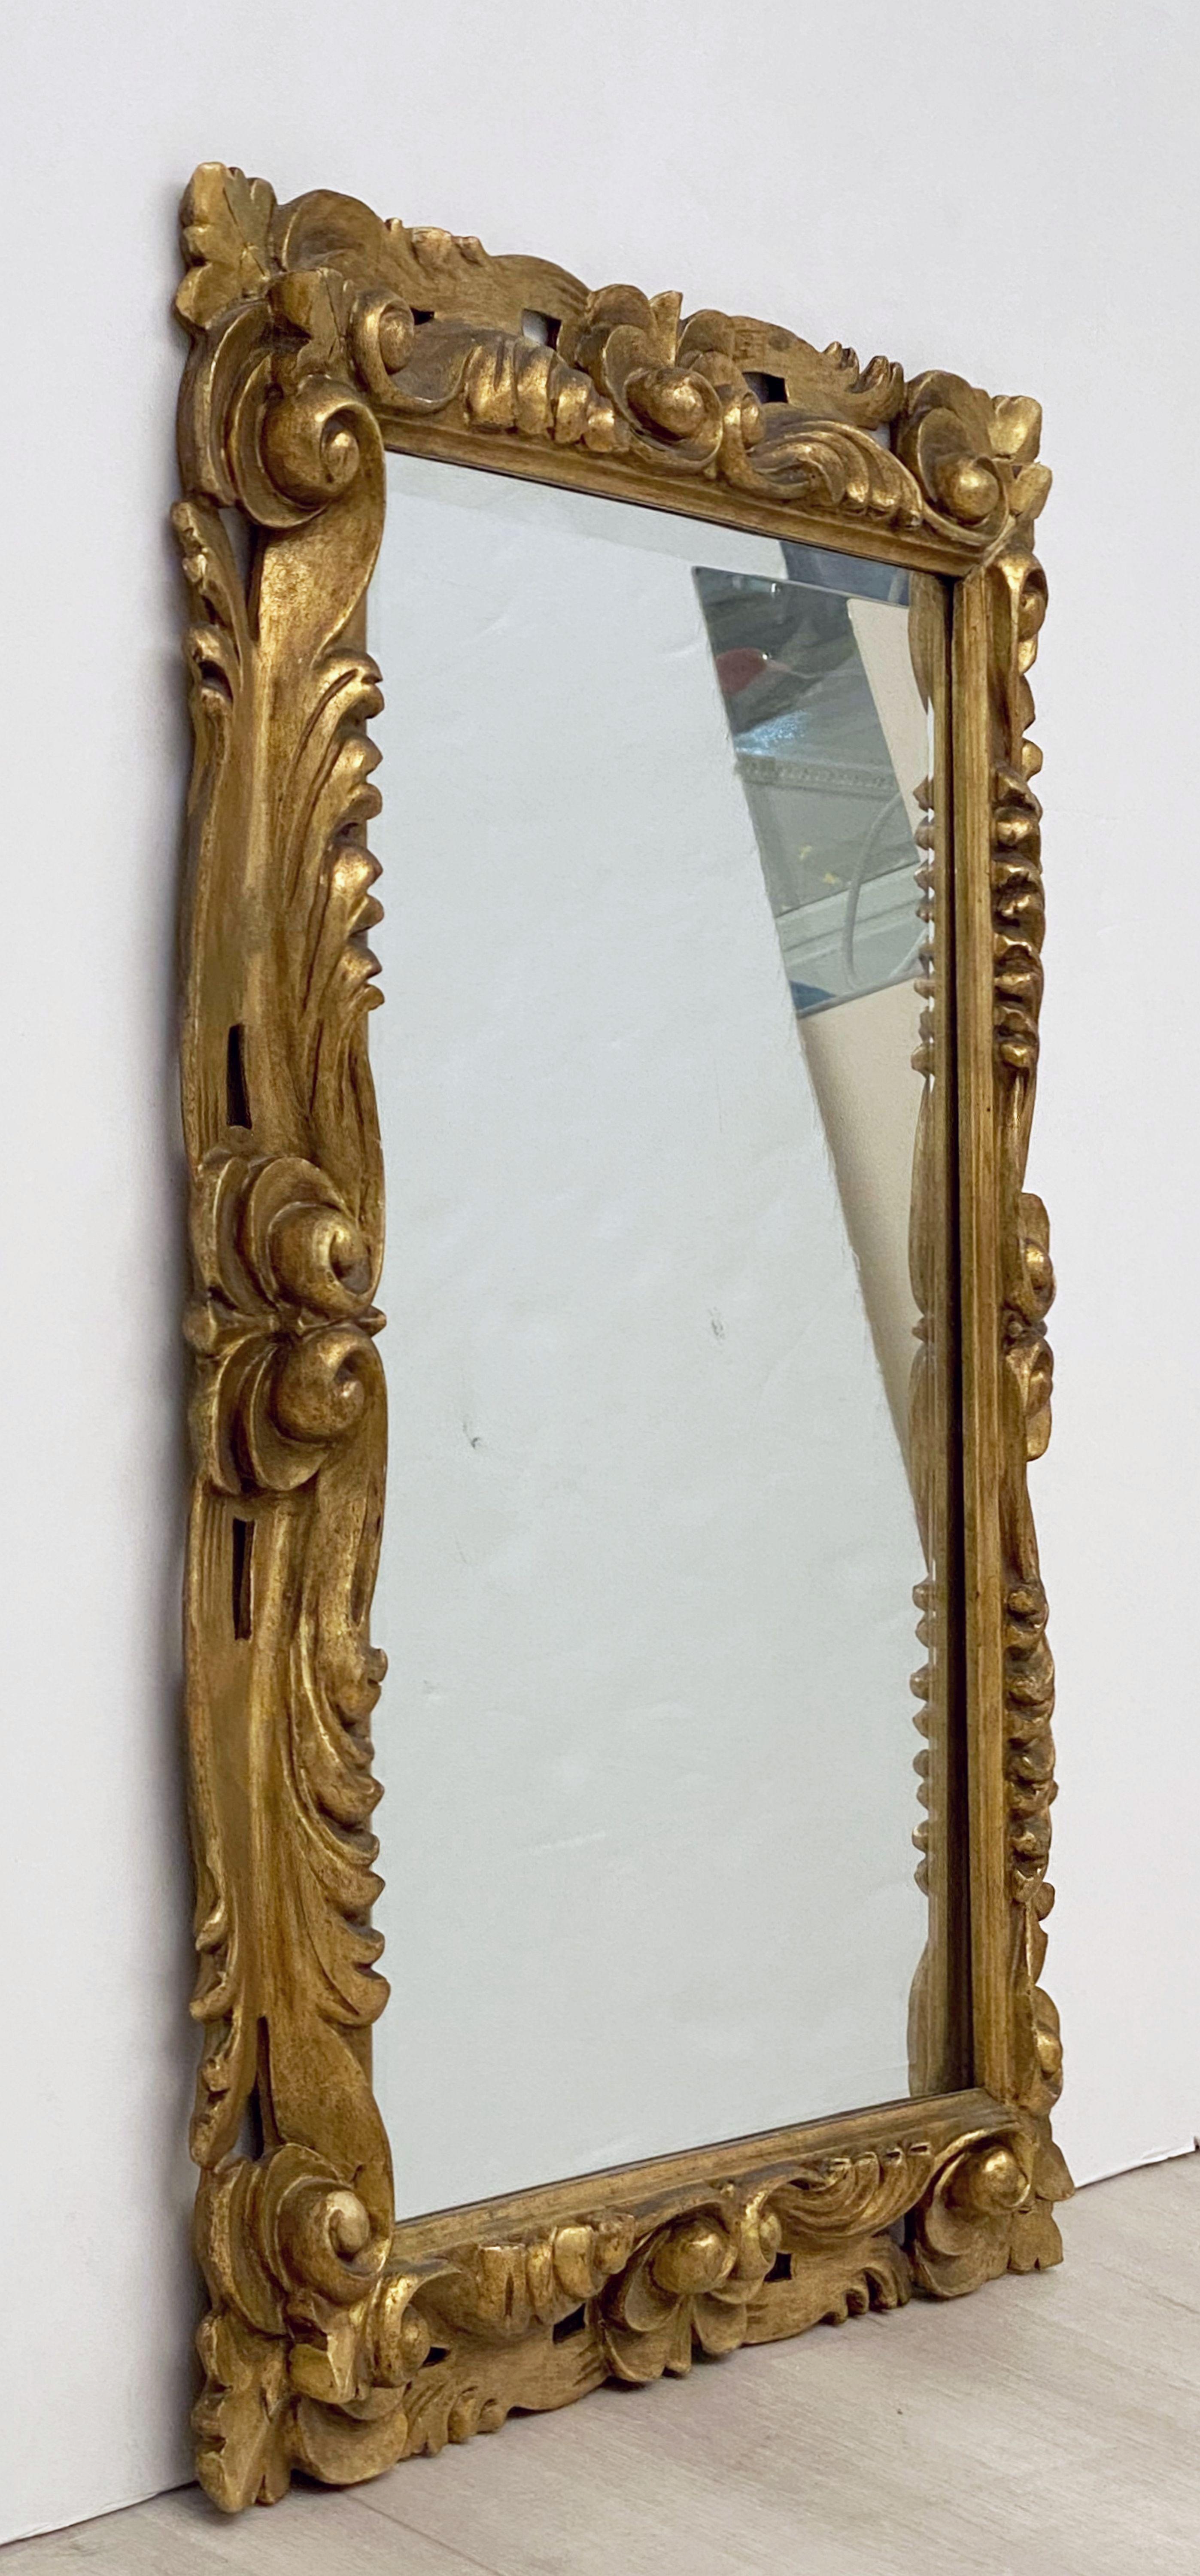 A fine Italian rectangular beveled mirror with a carved giltwood frame in the Rococo style.

Dimensions are H 29 inches x W 23 inches

Can be displayed vertically or horizontally.